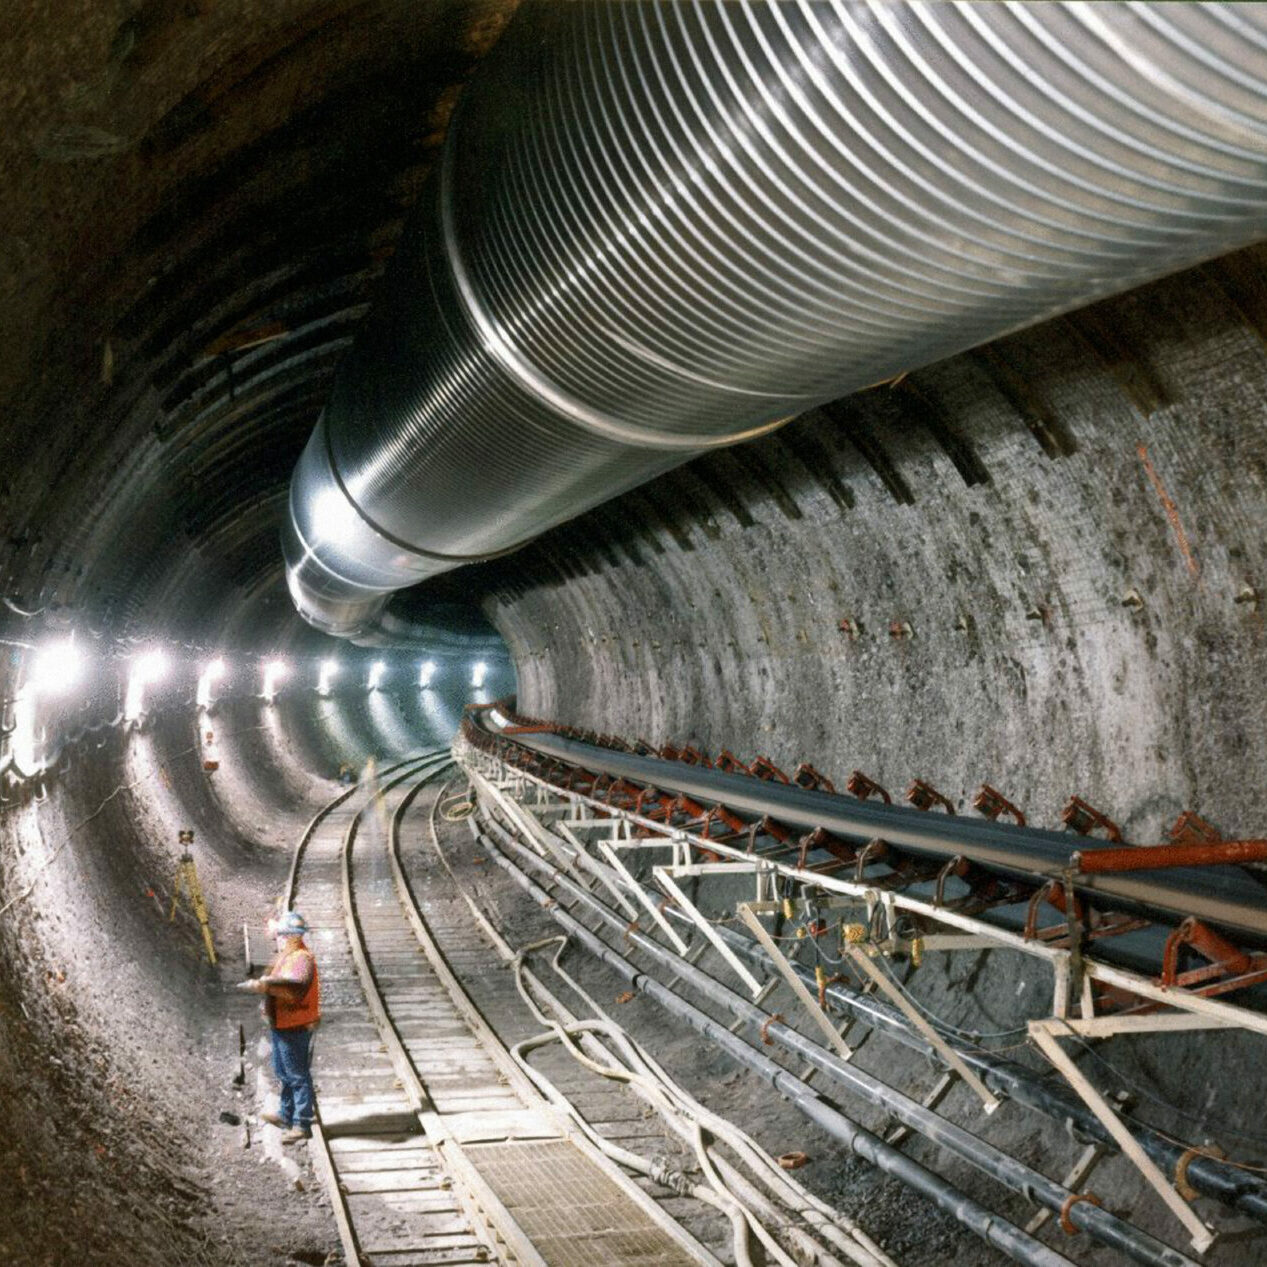 The underground Exploratory Studies Facility at Yucca Mountain in Nevada built by the Department of Energy to determine whether the location was suitable as a deep geological nuclear waste repository. Courtesy of the Department of Energy.